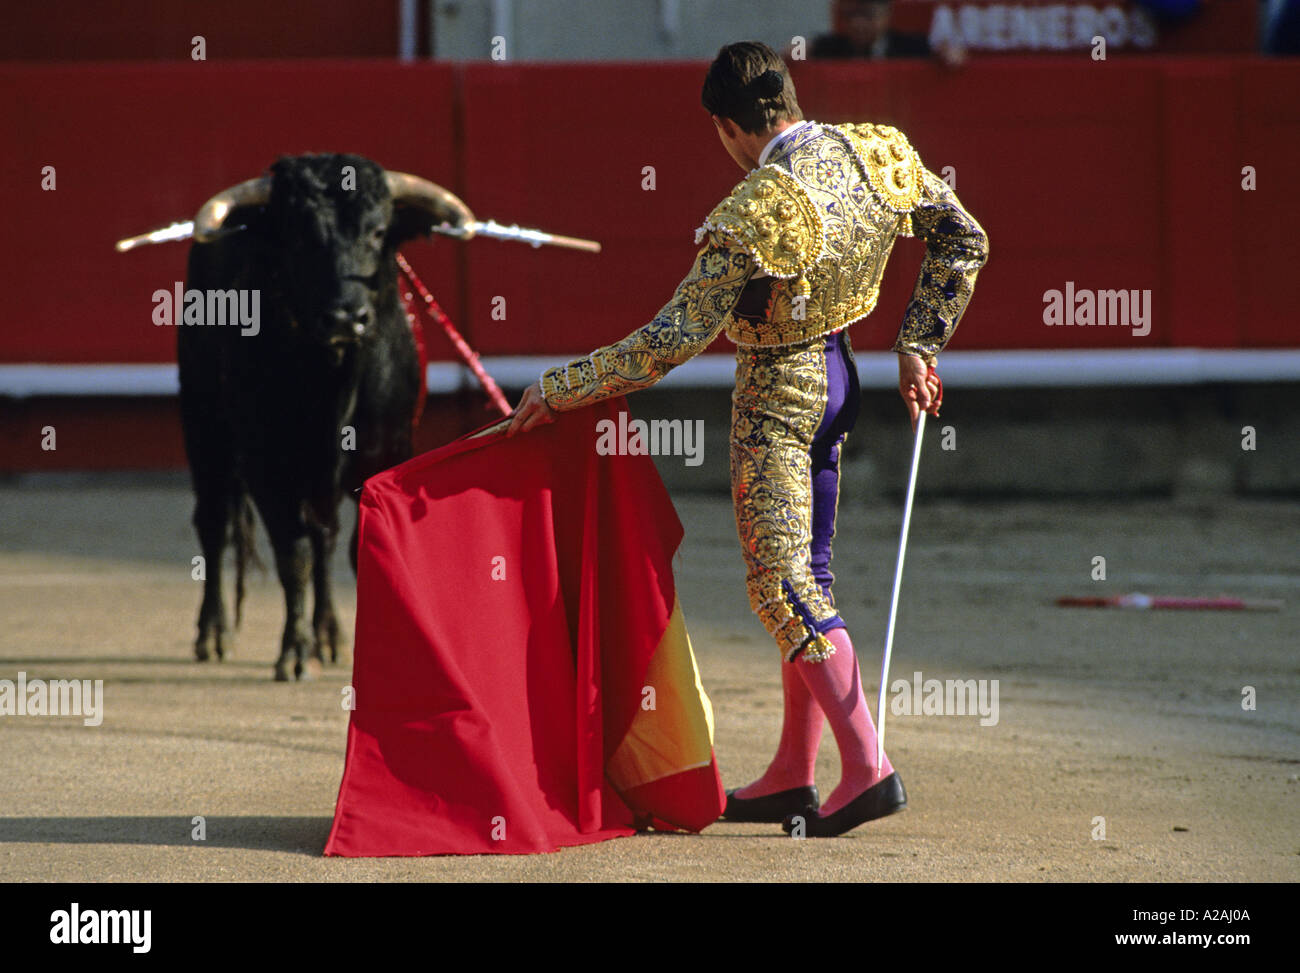 A matador attempts to provoke the bull with his red cape during a bullfight  in Barcelona Spain Stock Photo - Alamy